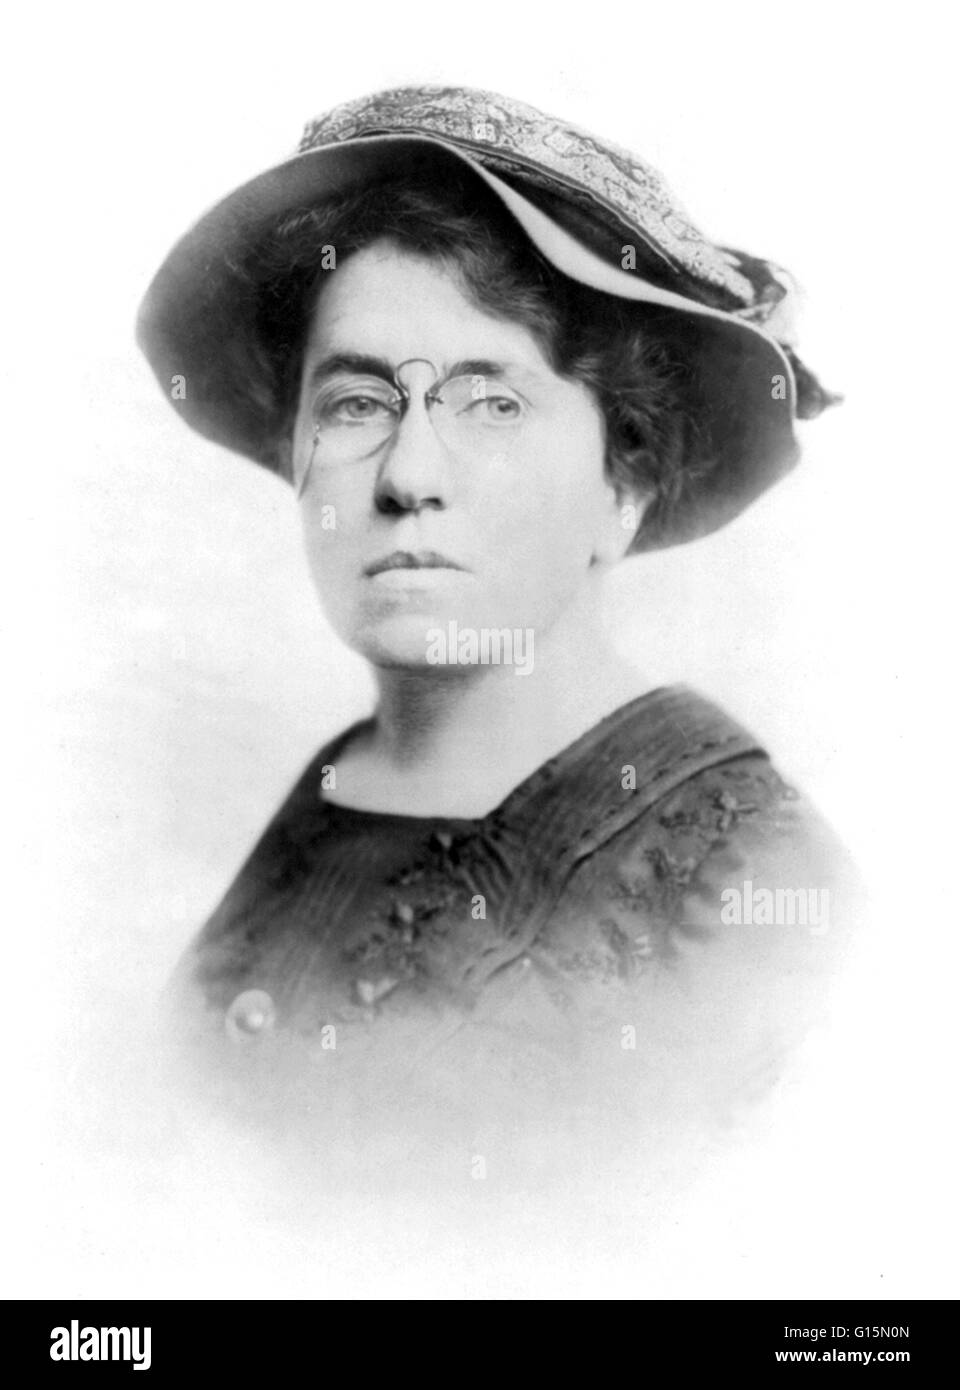 Emma Goldman (June 27, 1869 - May 14, 1940) was an anarchist known for her political activism, writing, and speeches. Born in the Russian Empire (now Lithuania) she emigrated to the United States in 1885 and lived in New York City. Attracted to anarchism Stock Photo